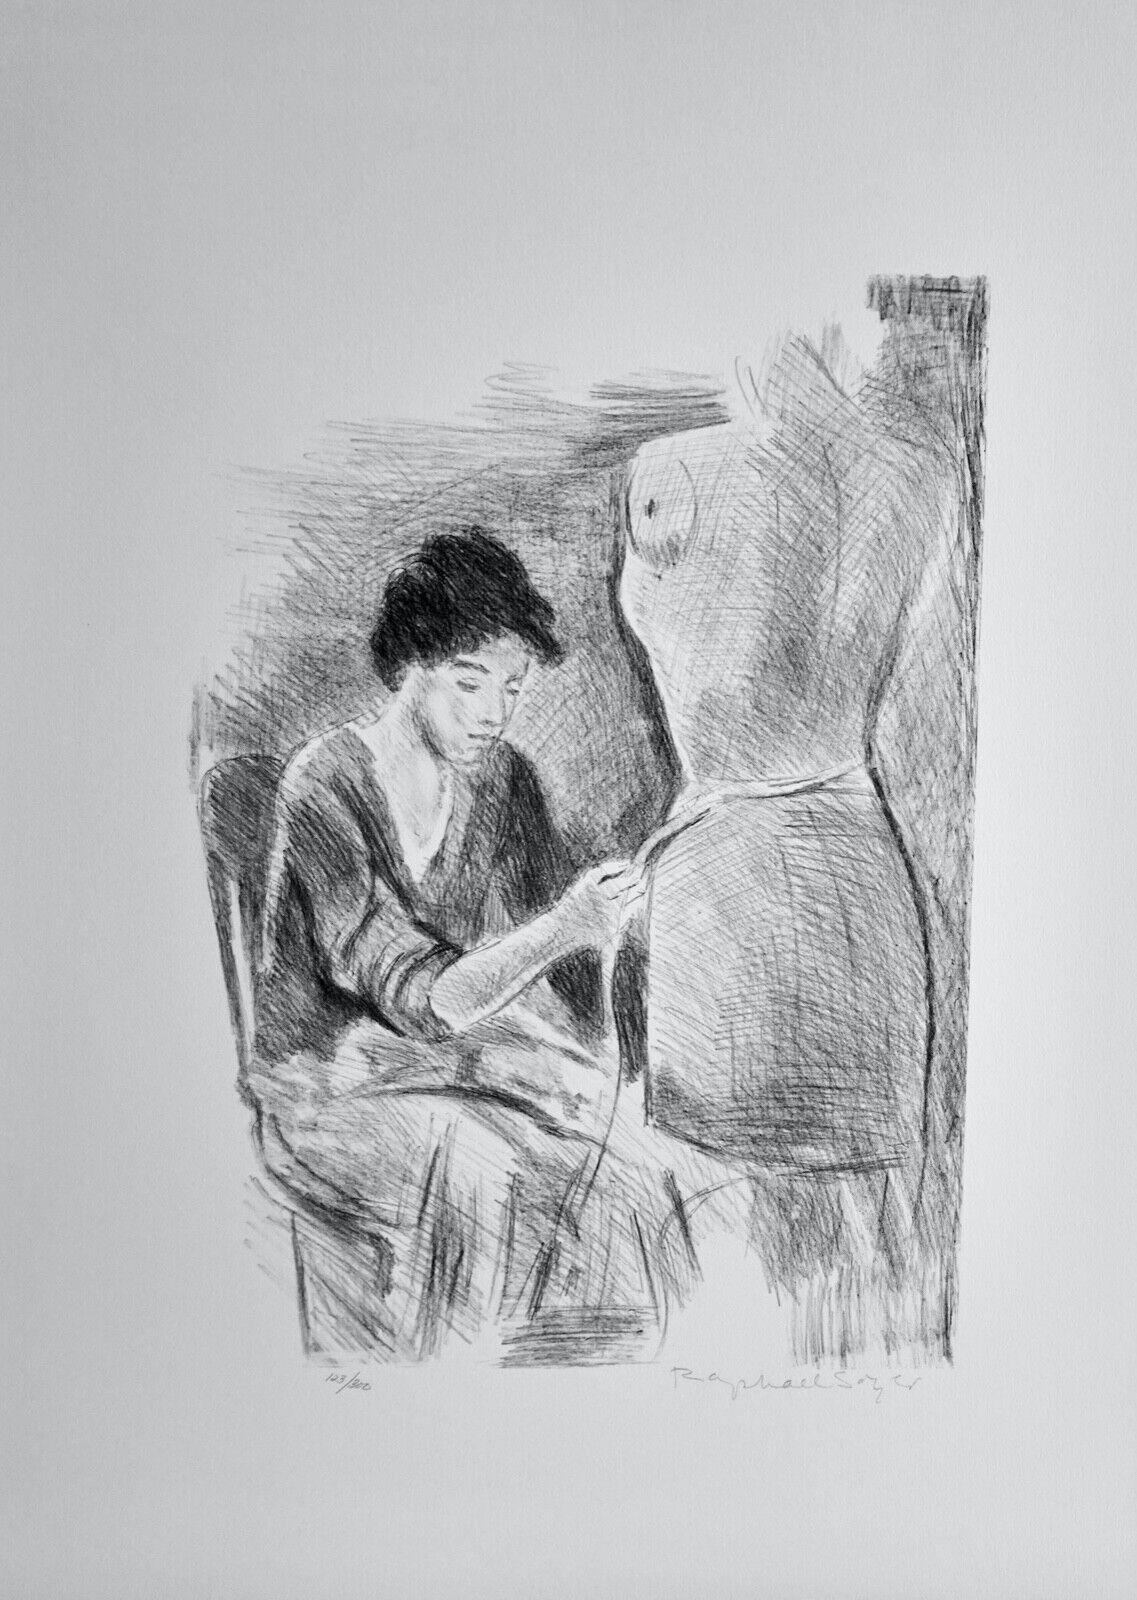 Artist: Raphael Soyer
Title: Seamstress II Portfolio
Medium: 2 Lithographs, 1 printed in color & 1 black/white
Original paper portfolio cover 
Signed: Hand Signed
Edition: From the Edition of 300
Measurements: 21 1/2